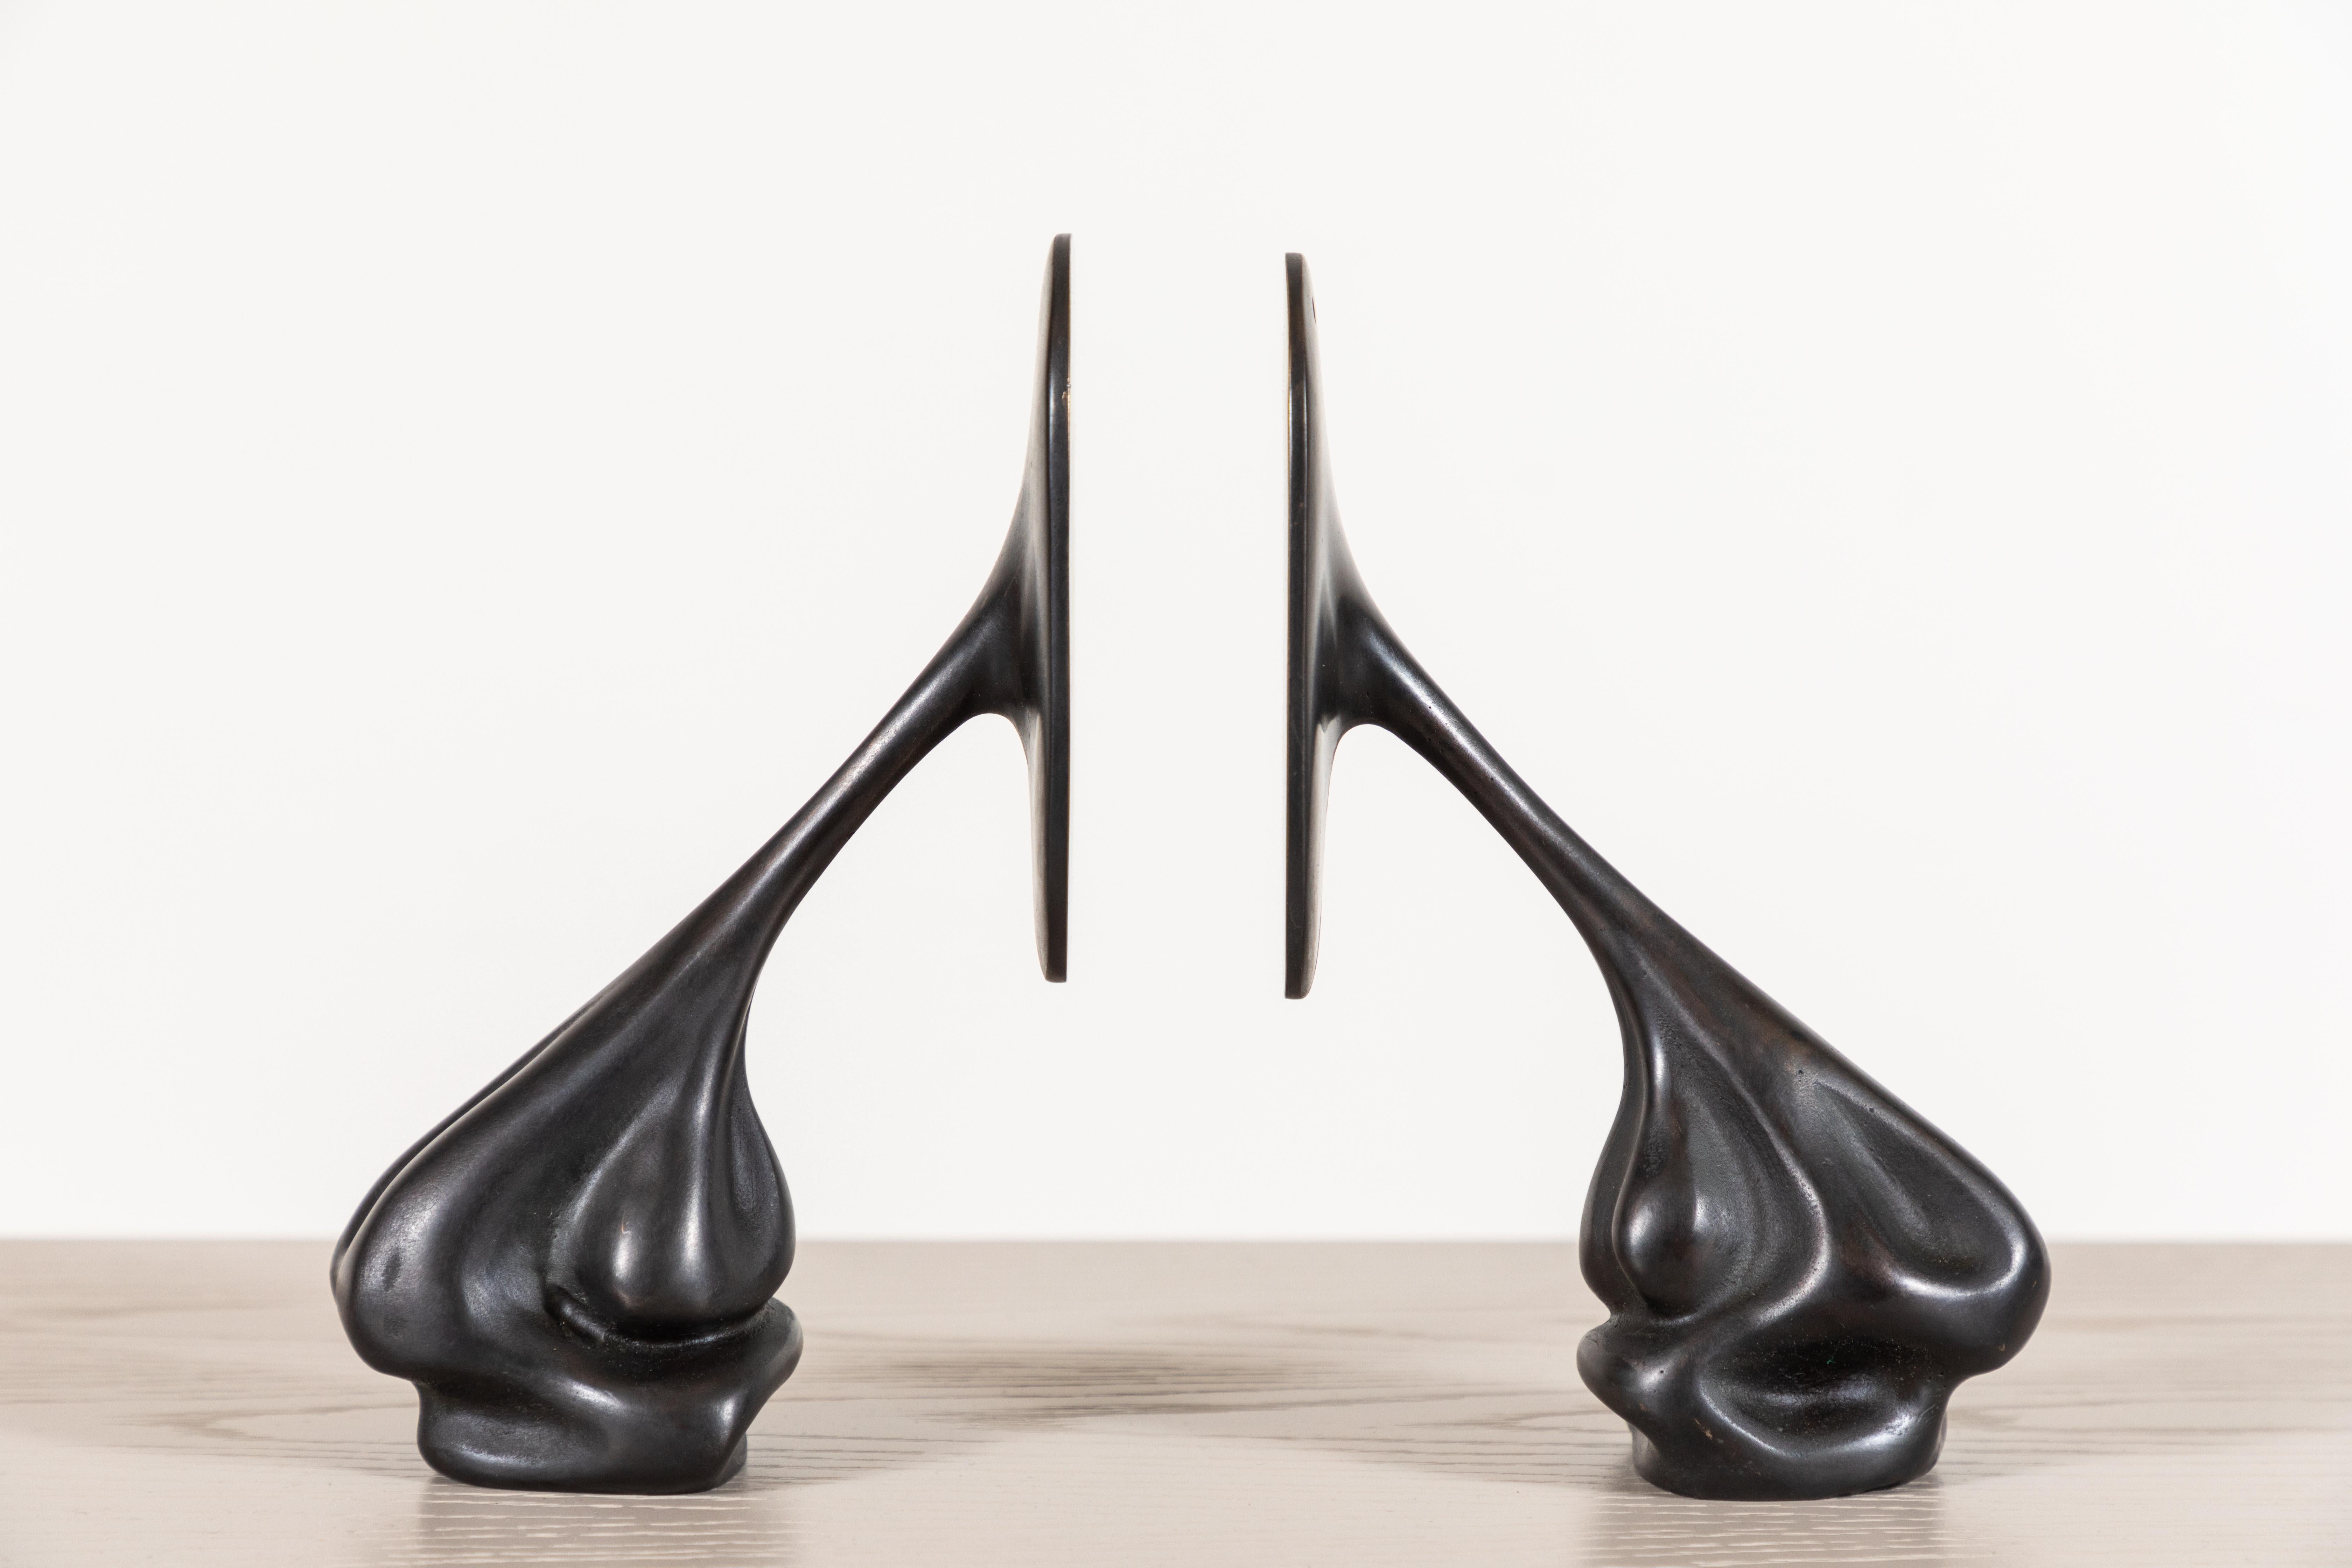 Pair of cast bronze bookends by artist Vincent Pocsik in collaboration with Lawson-Fenning. Made of natural materials, this decorative object can be accessorized on tabletop, book shelf, or desk to achieve an organic modern style. 

Vincent Pocsik